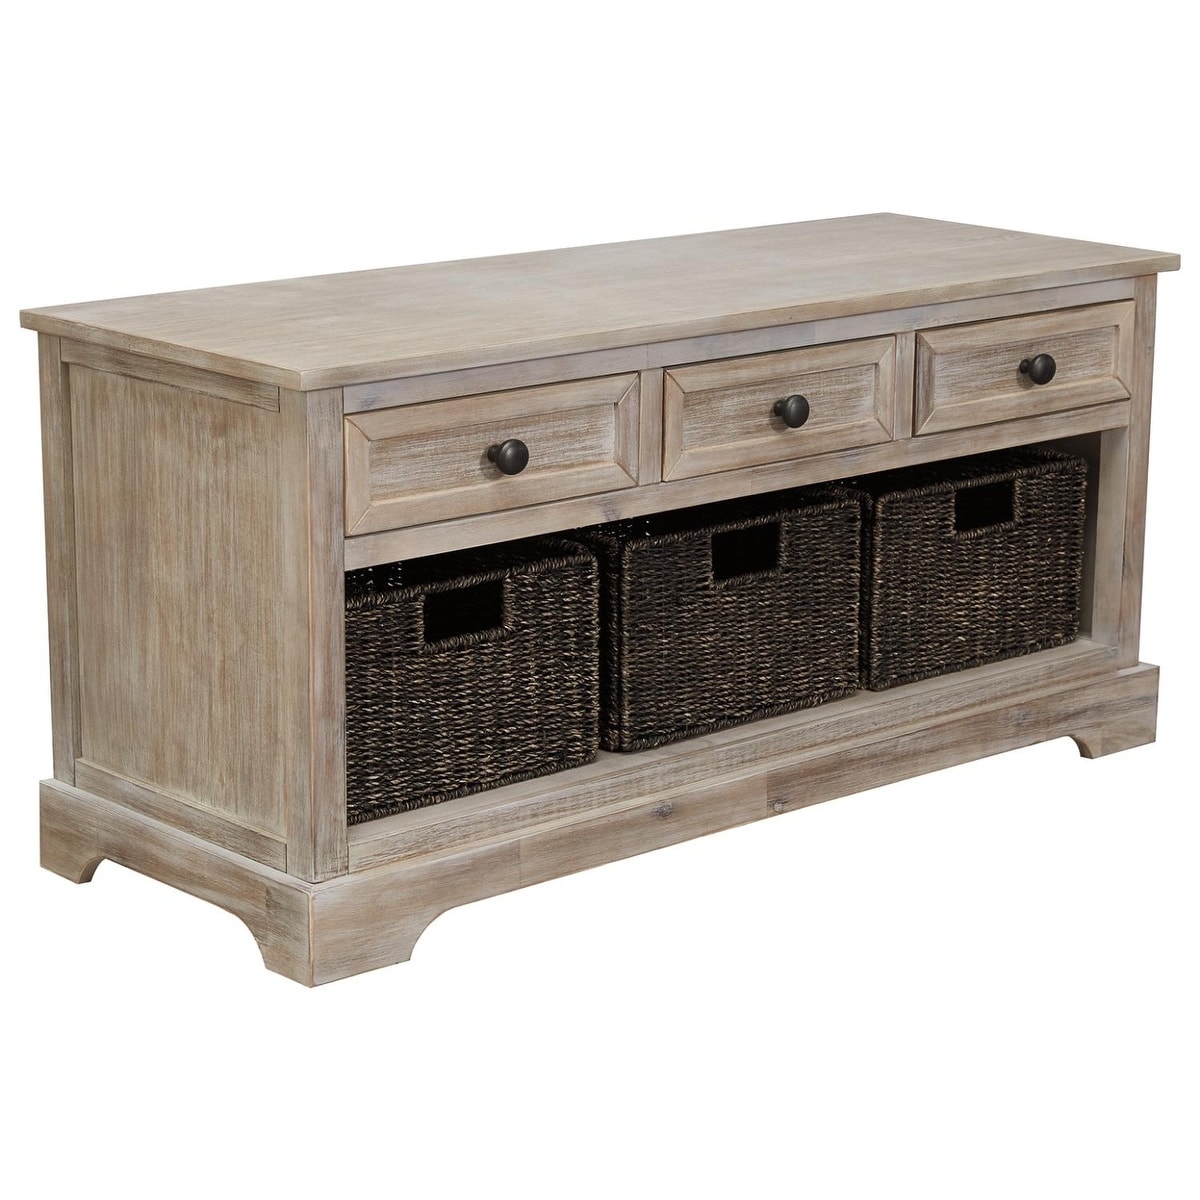 Storage Bench Drawers Baskets Brown Rustic Organizer Entryway Home